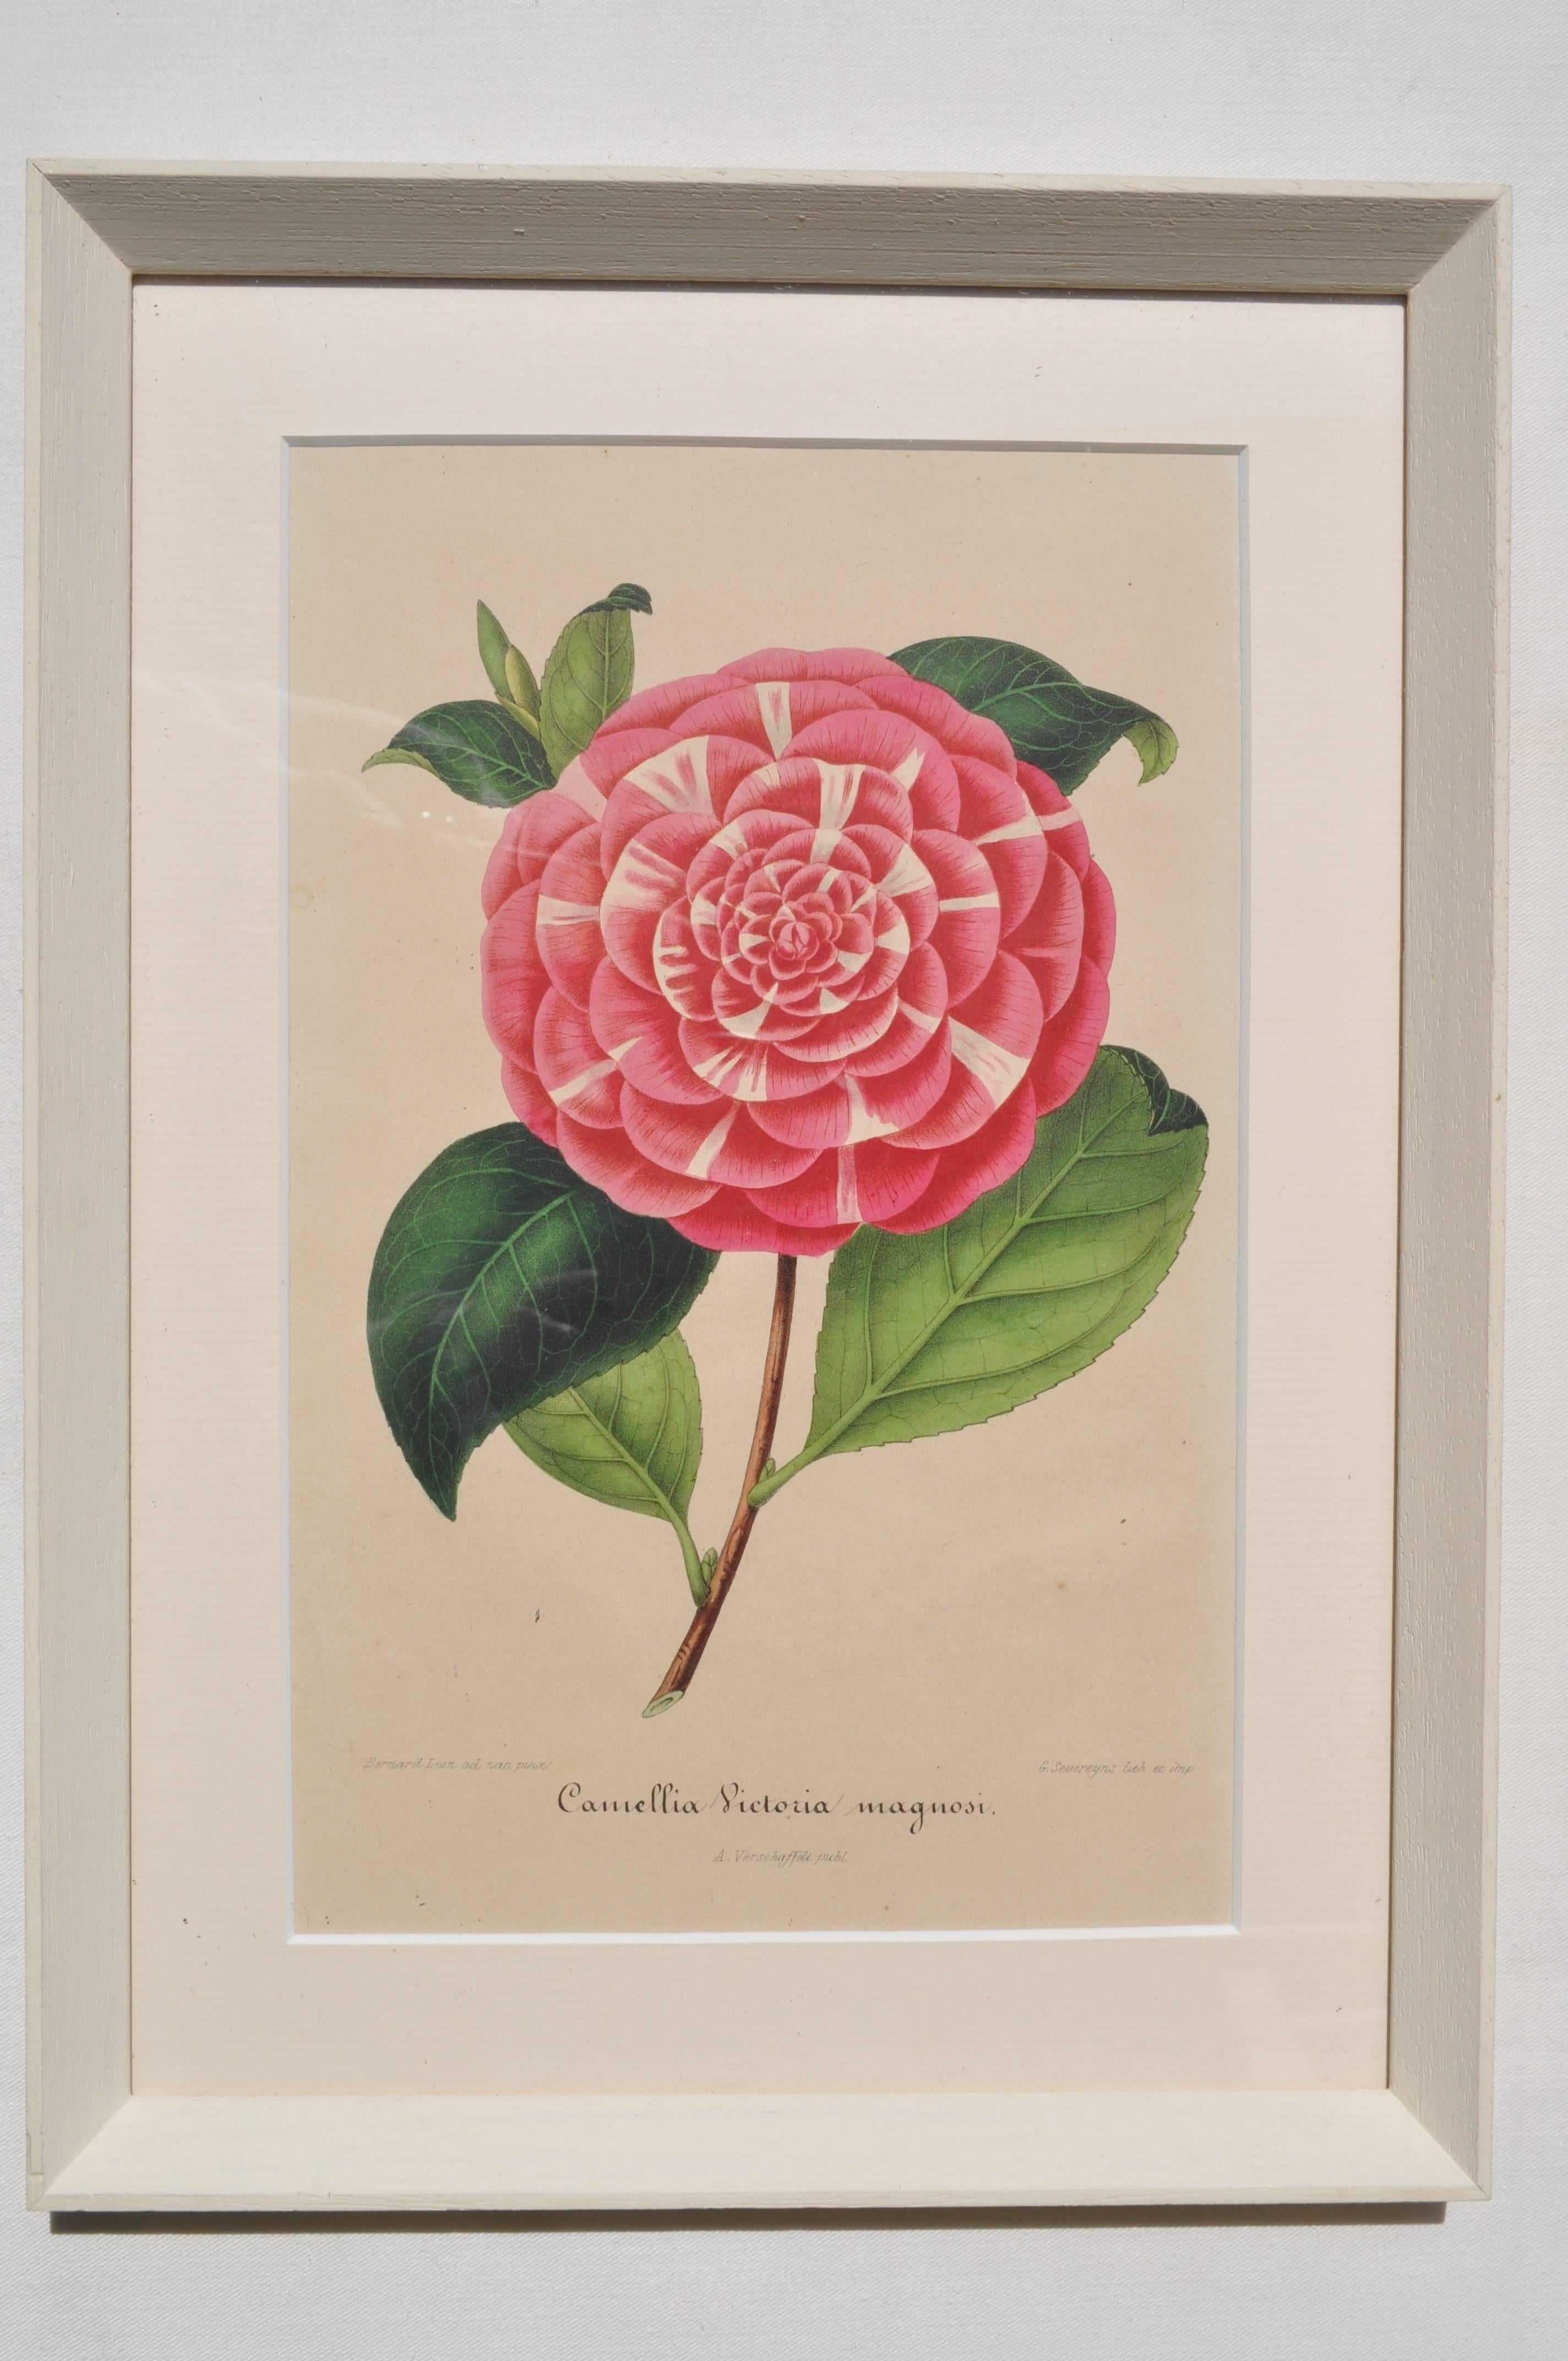 A set of six original colored lithographic engravings from a folio of Camellias published in France in 1854.